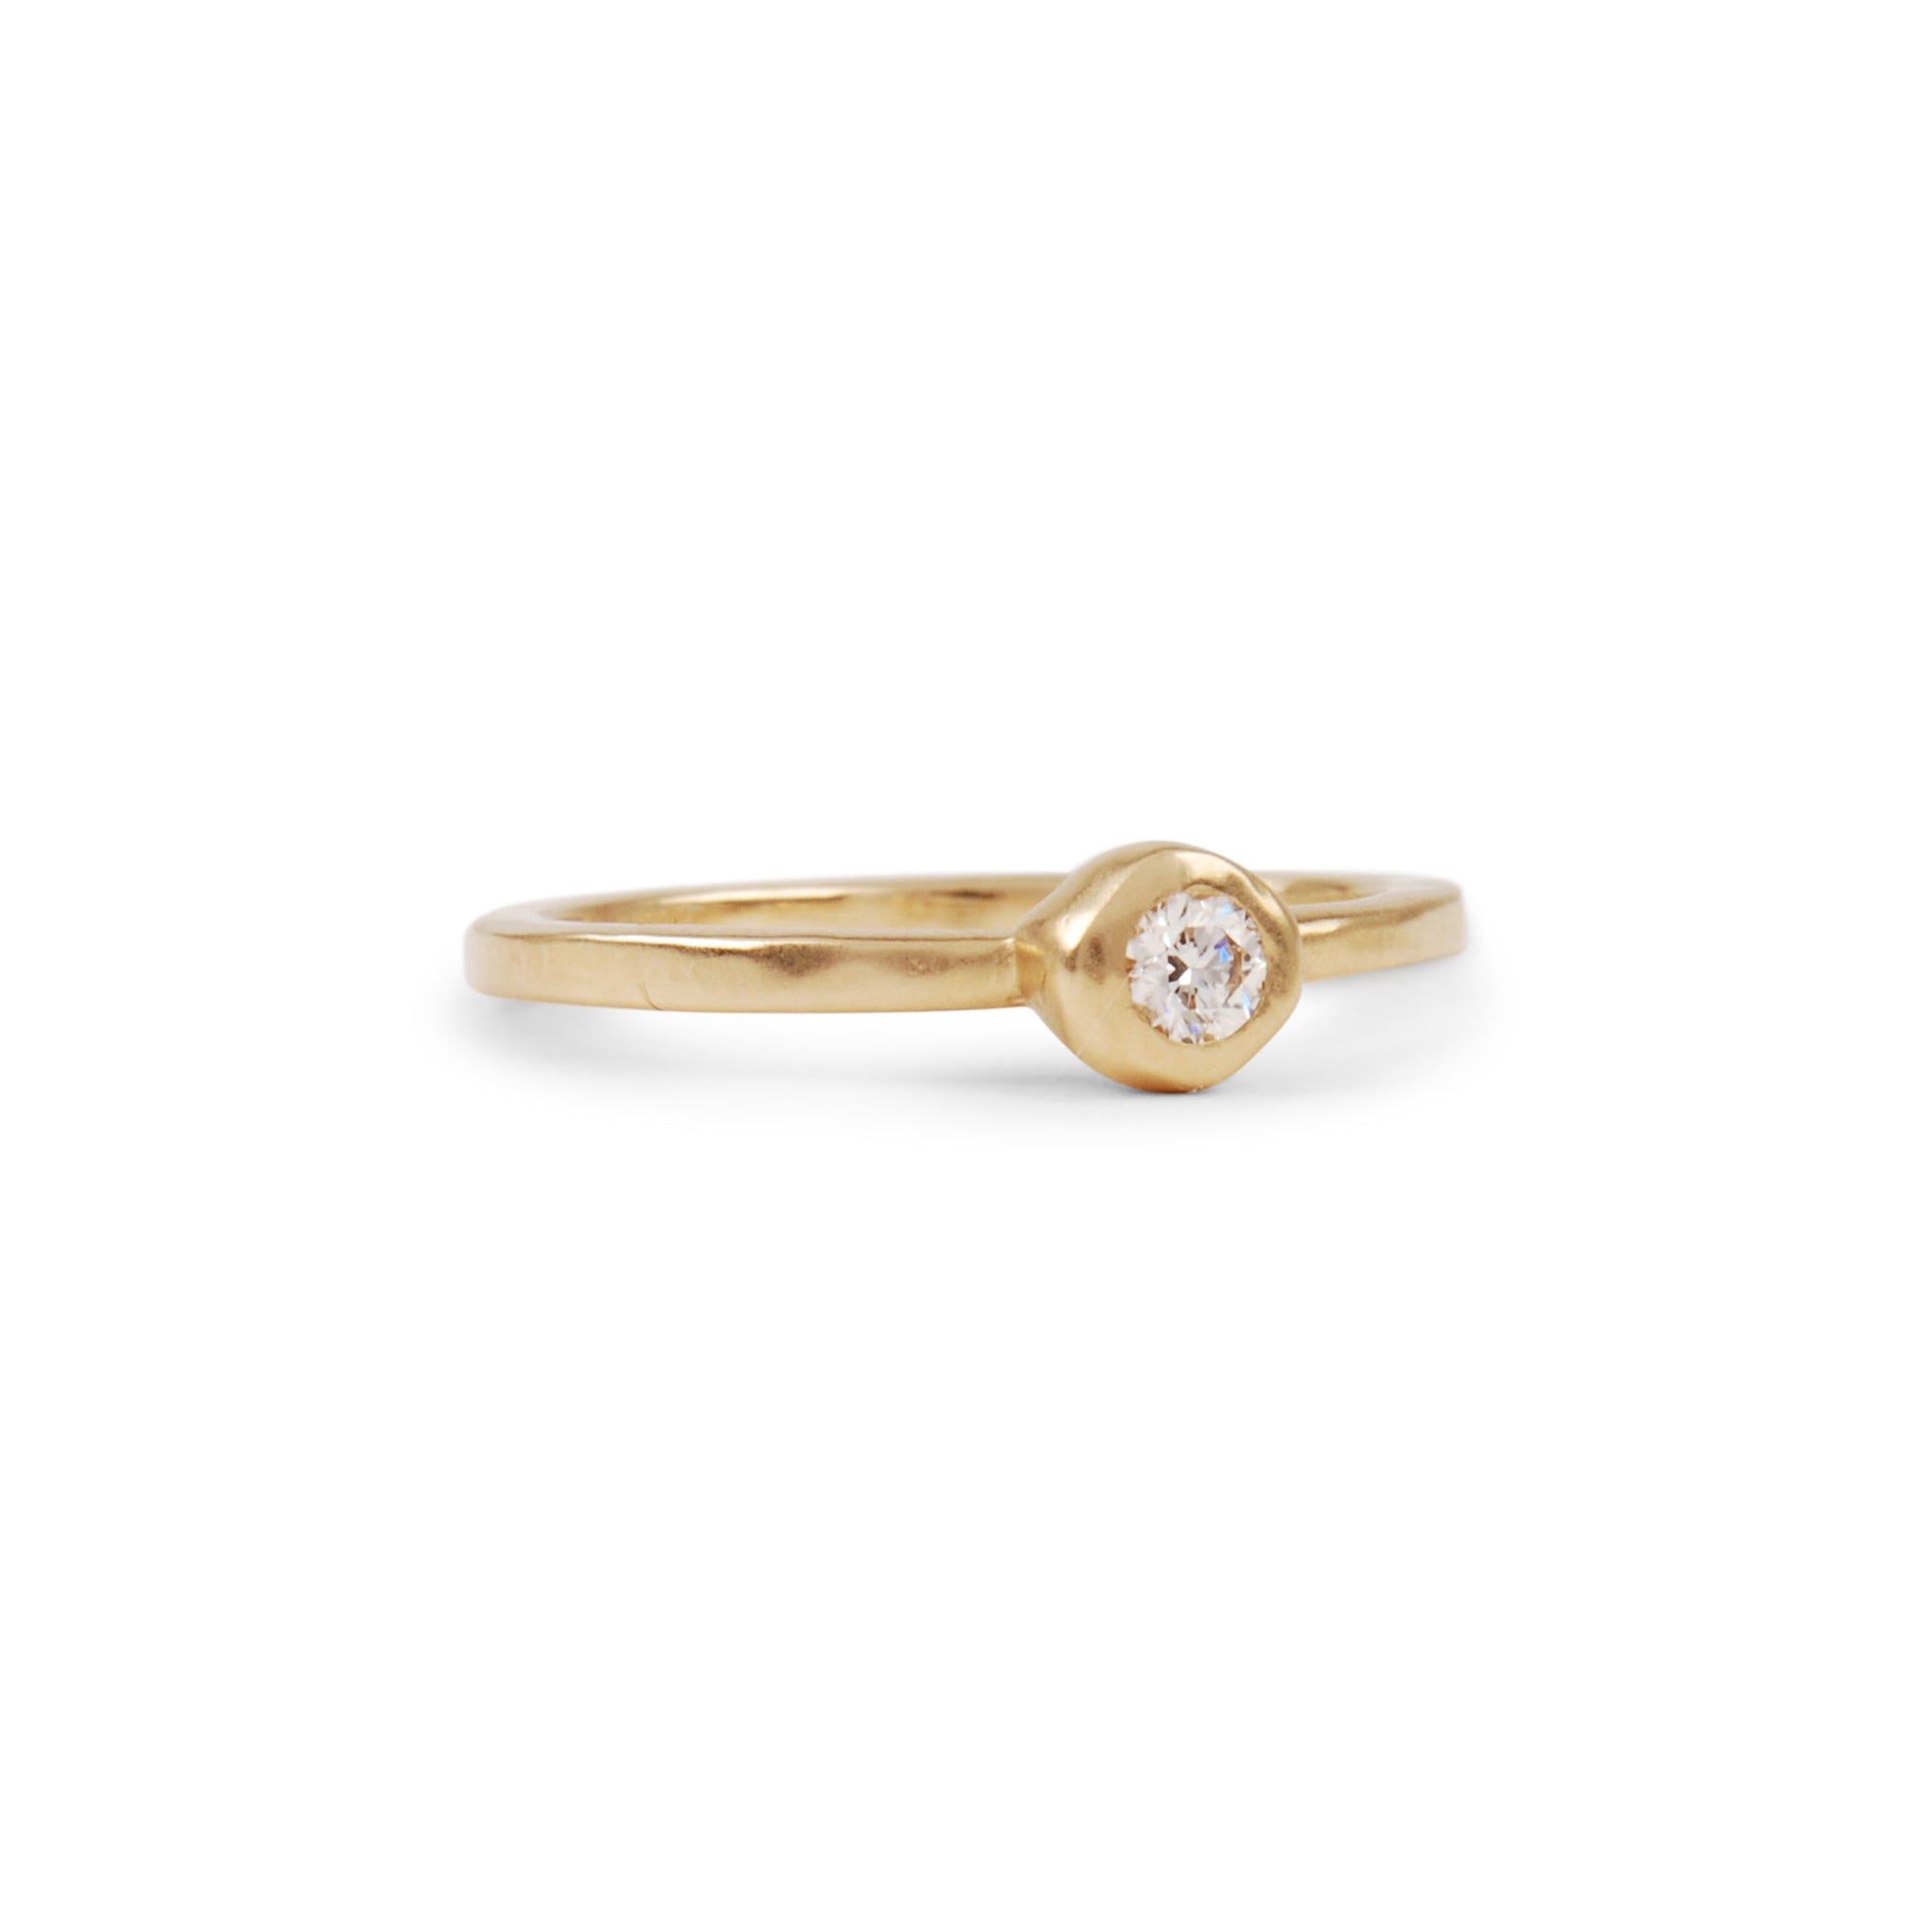 Minimal, organic, and unique, the Classic Diamond Solitaire Ring is the perfect way to commemorate a special occasionMinimal, organic, and unique, the Classic Diamond Solitaire Ring is the perfect way to commemorate a special occasion